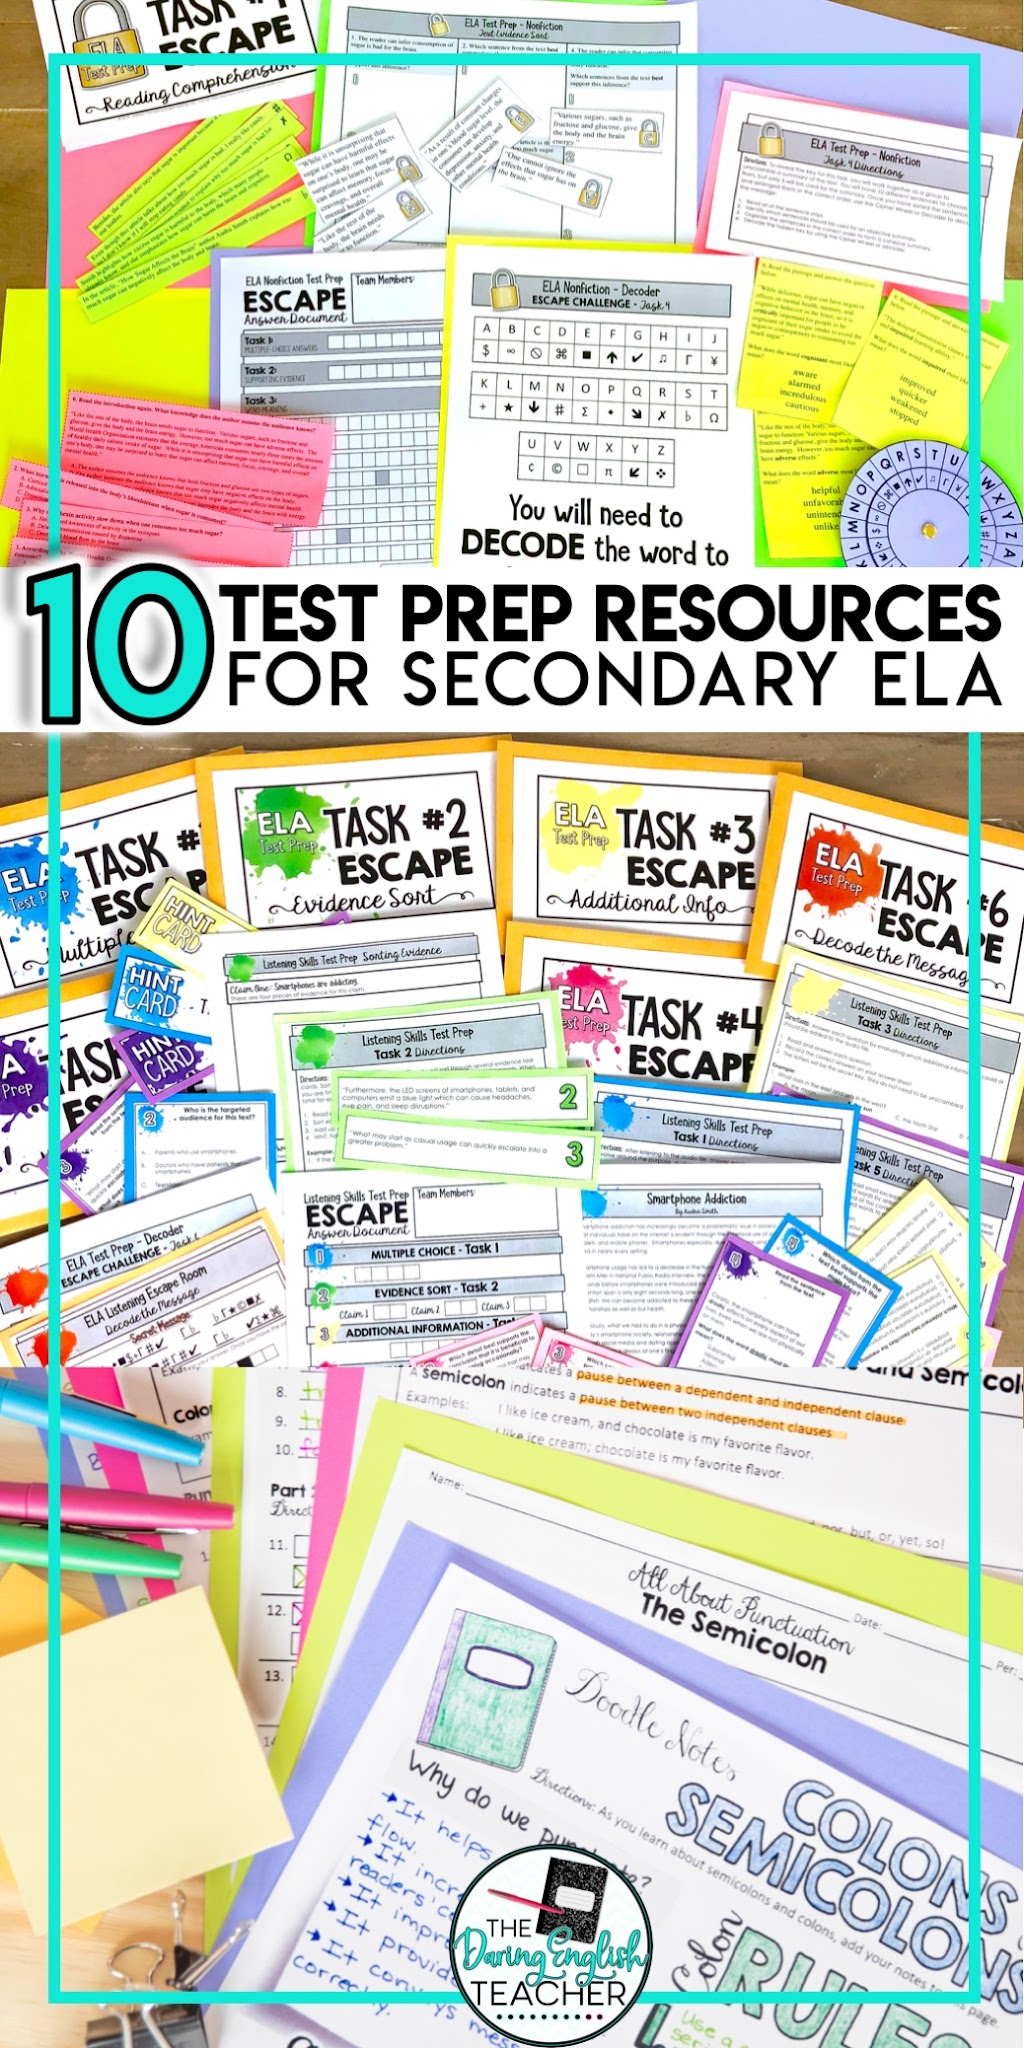 10 Resources to Prepare Students for Middle School and High School ELA Standardized Tests